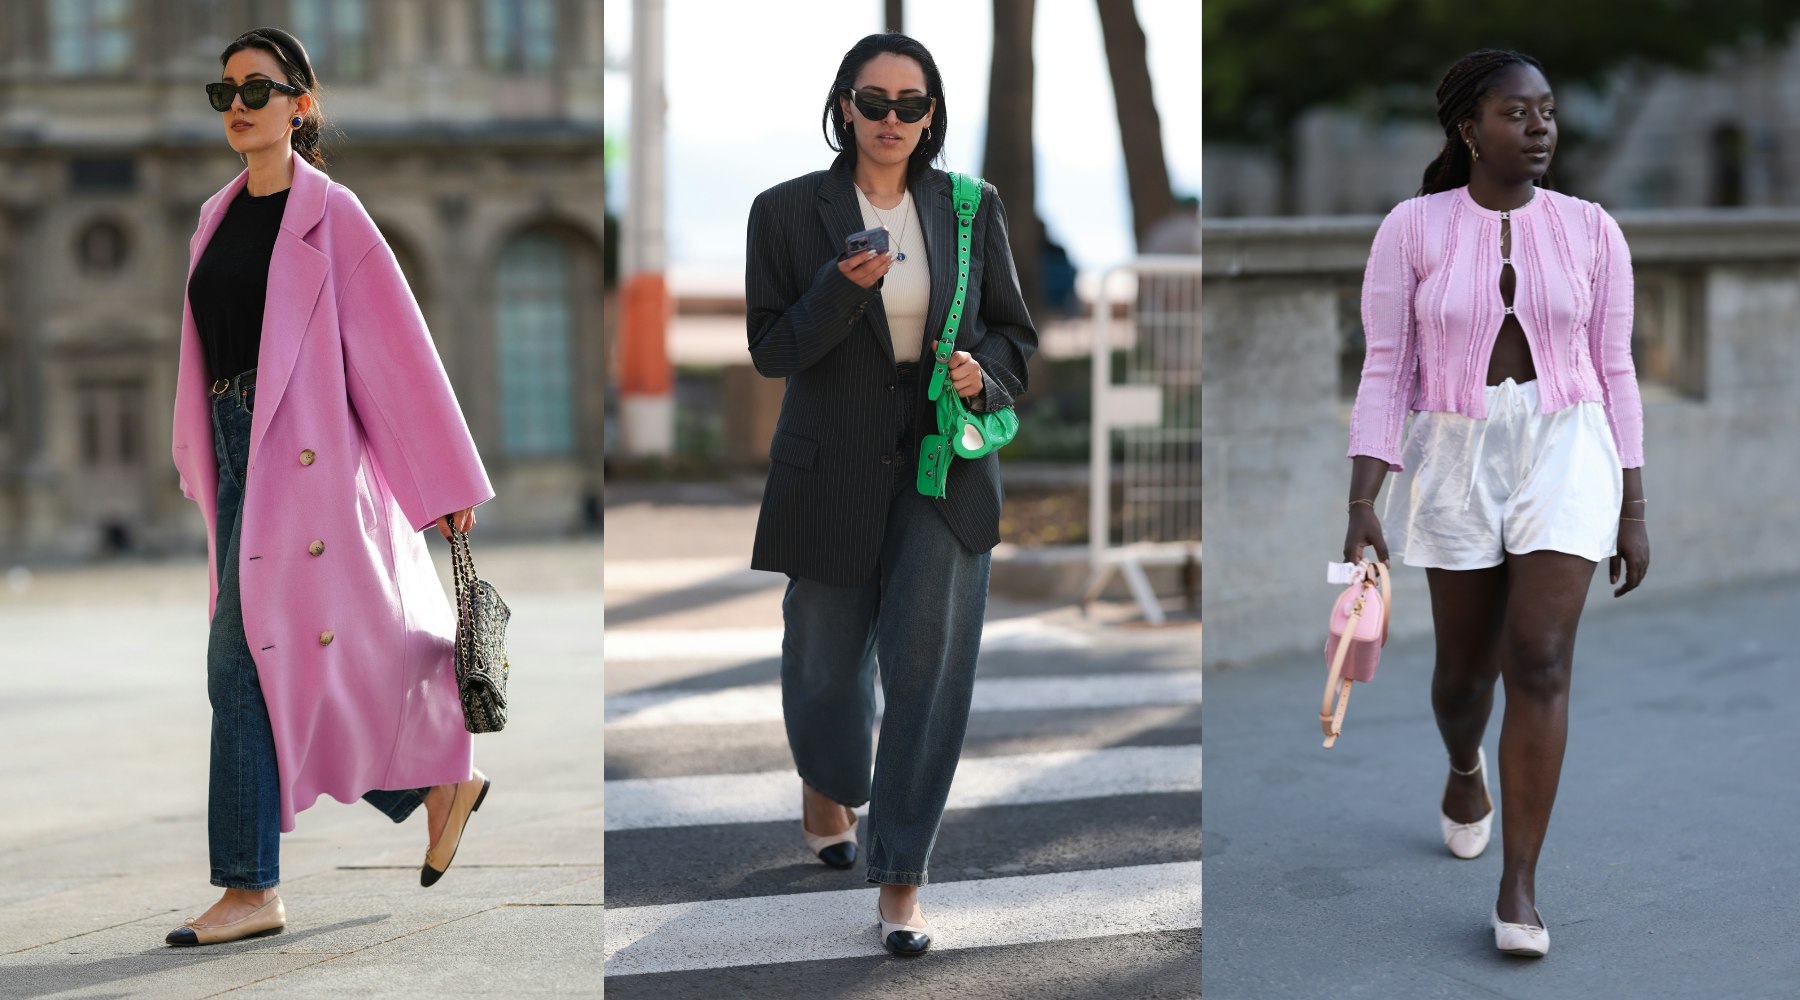 Chanel Ballet Flats: Are They Worth It? - It's Casual Blog